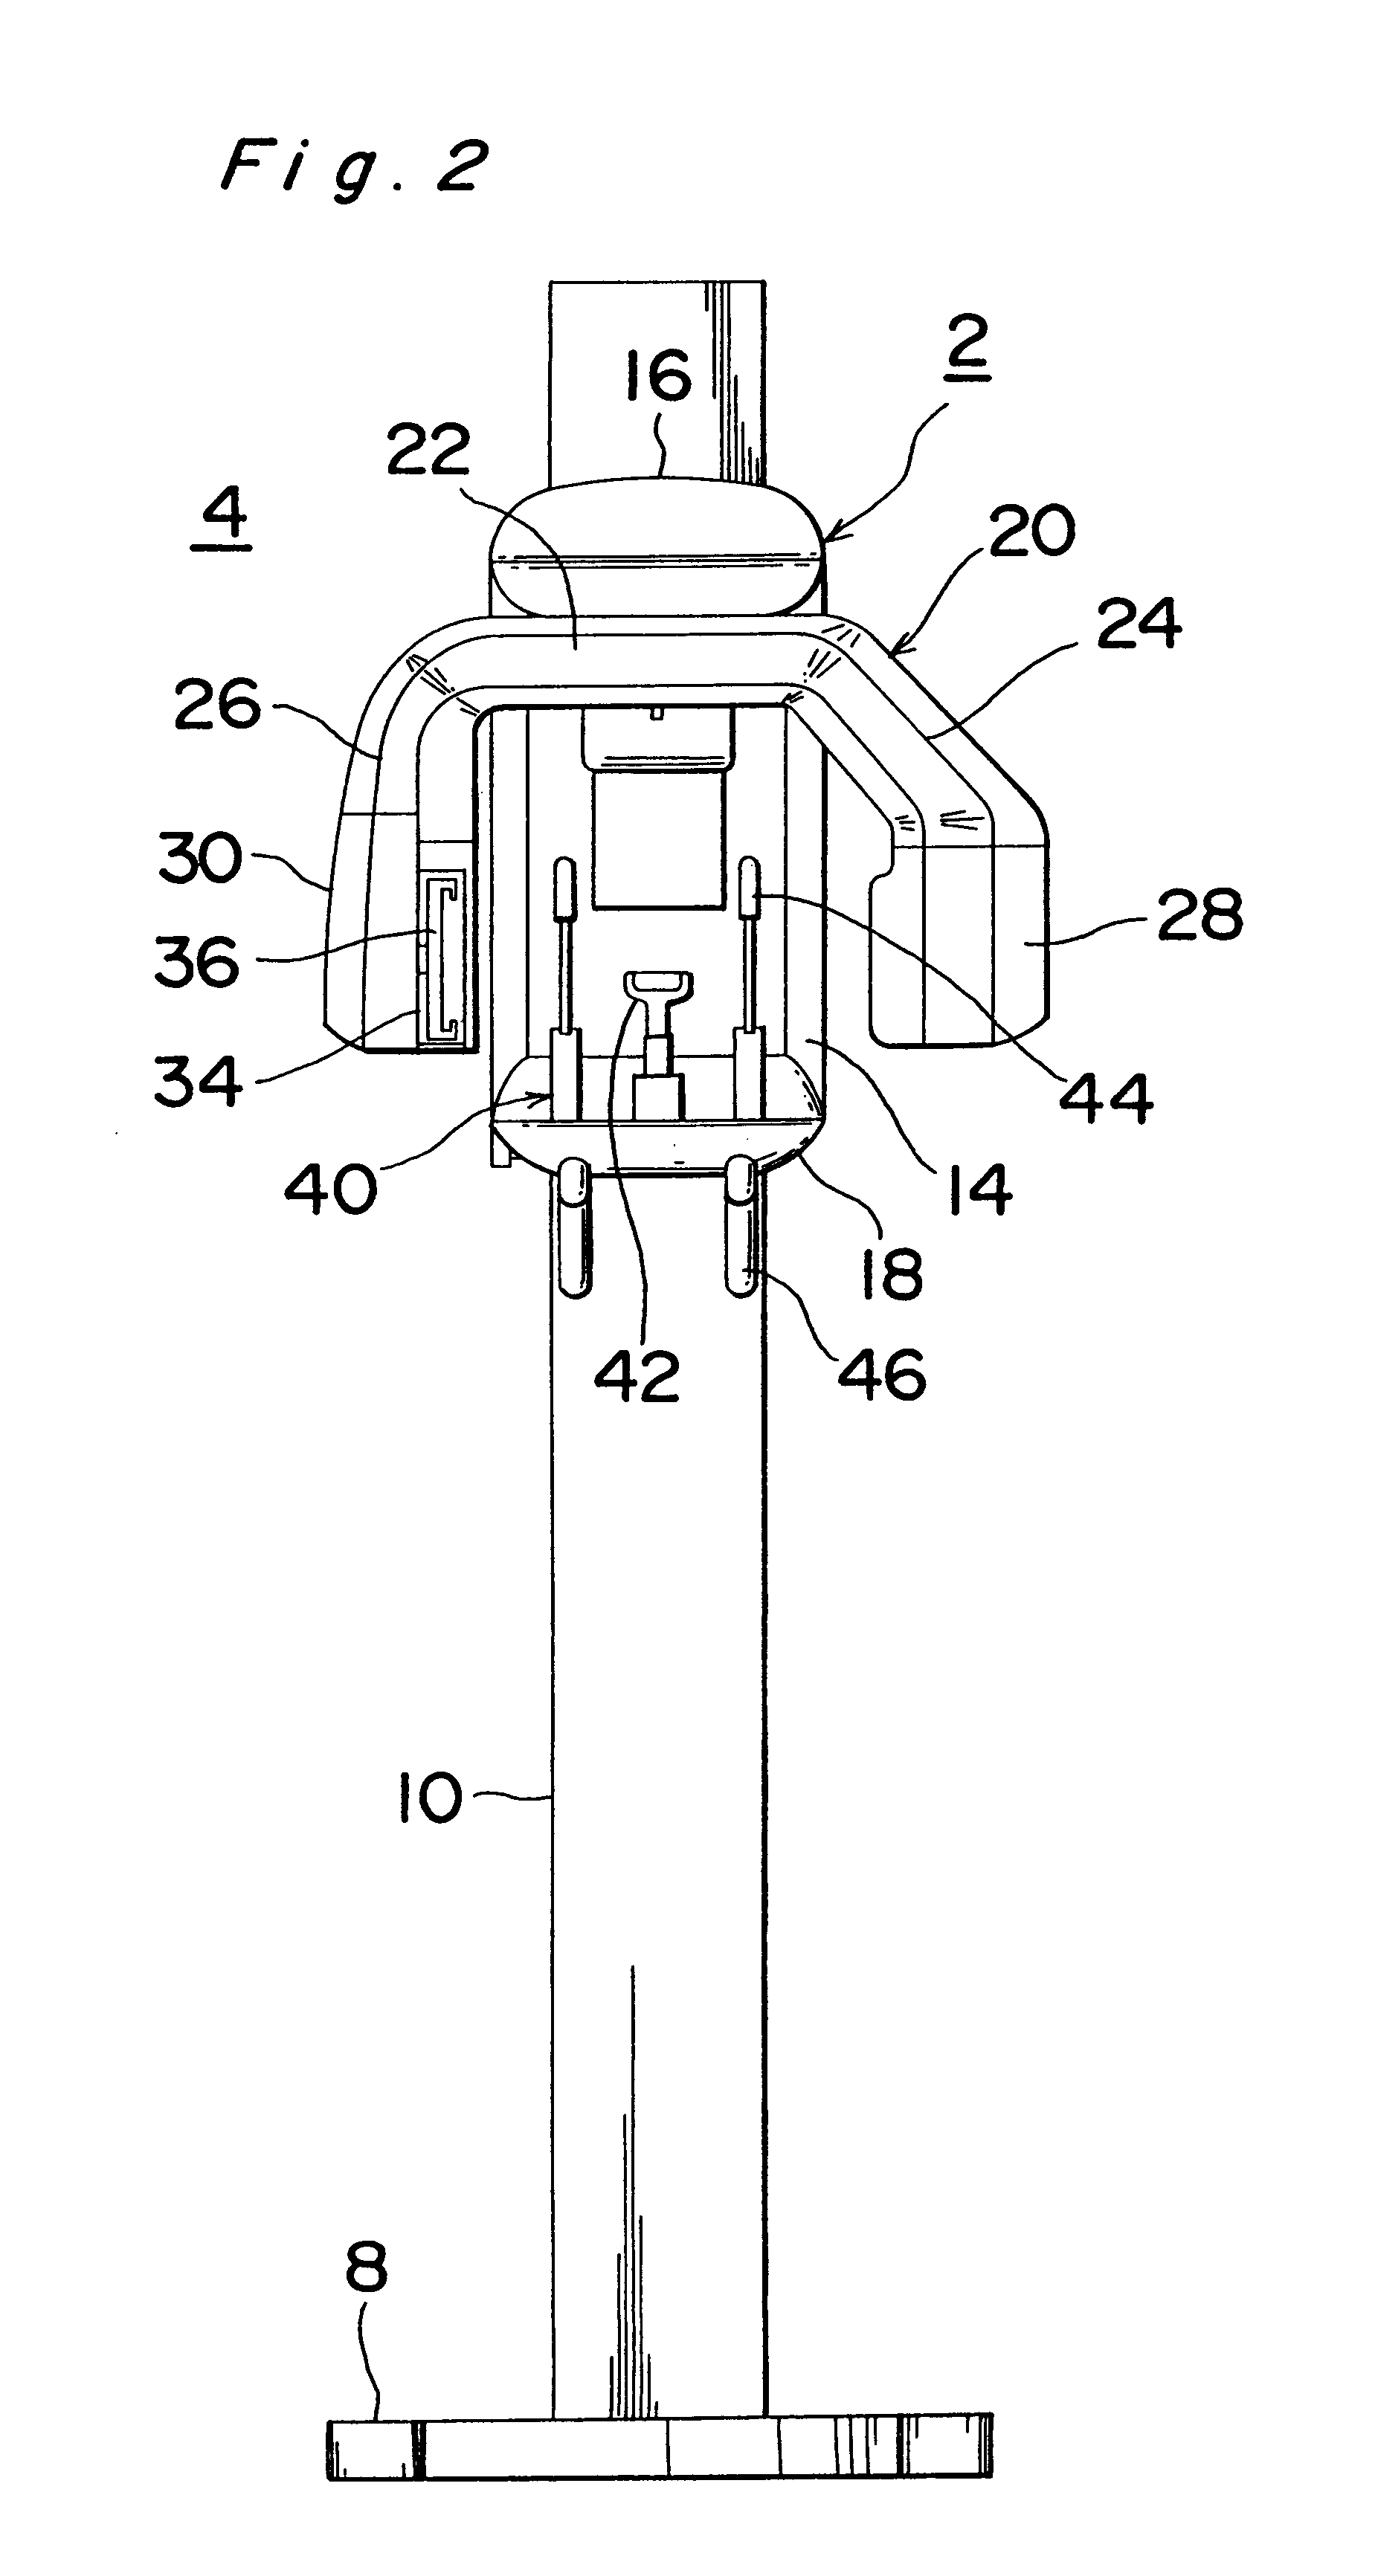 X-ray apparatus with improved patient access